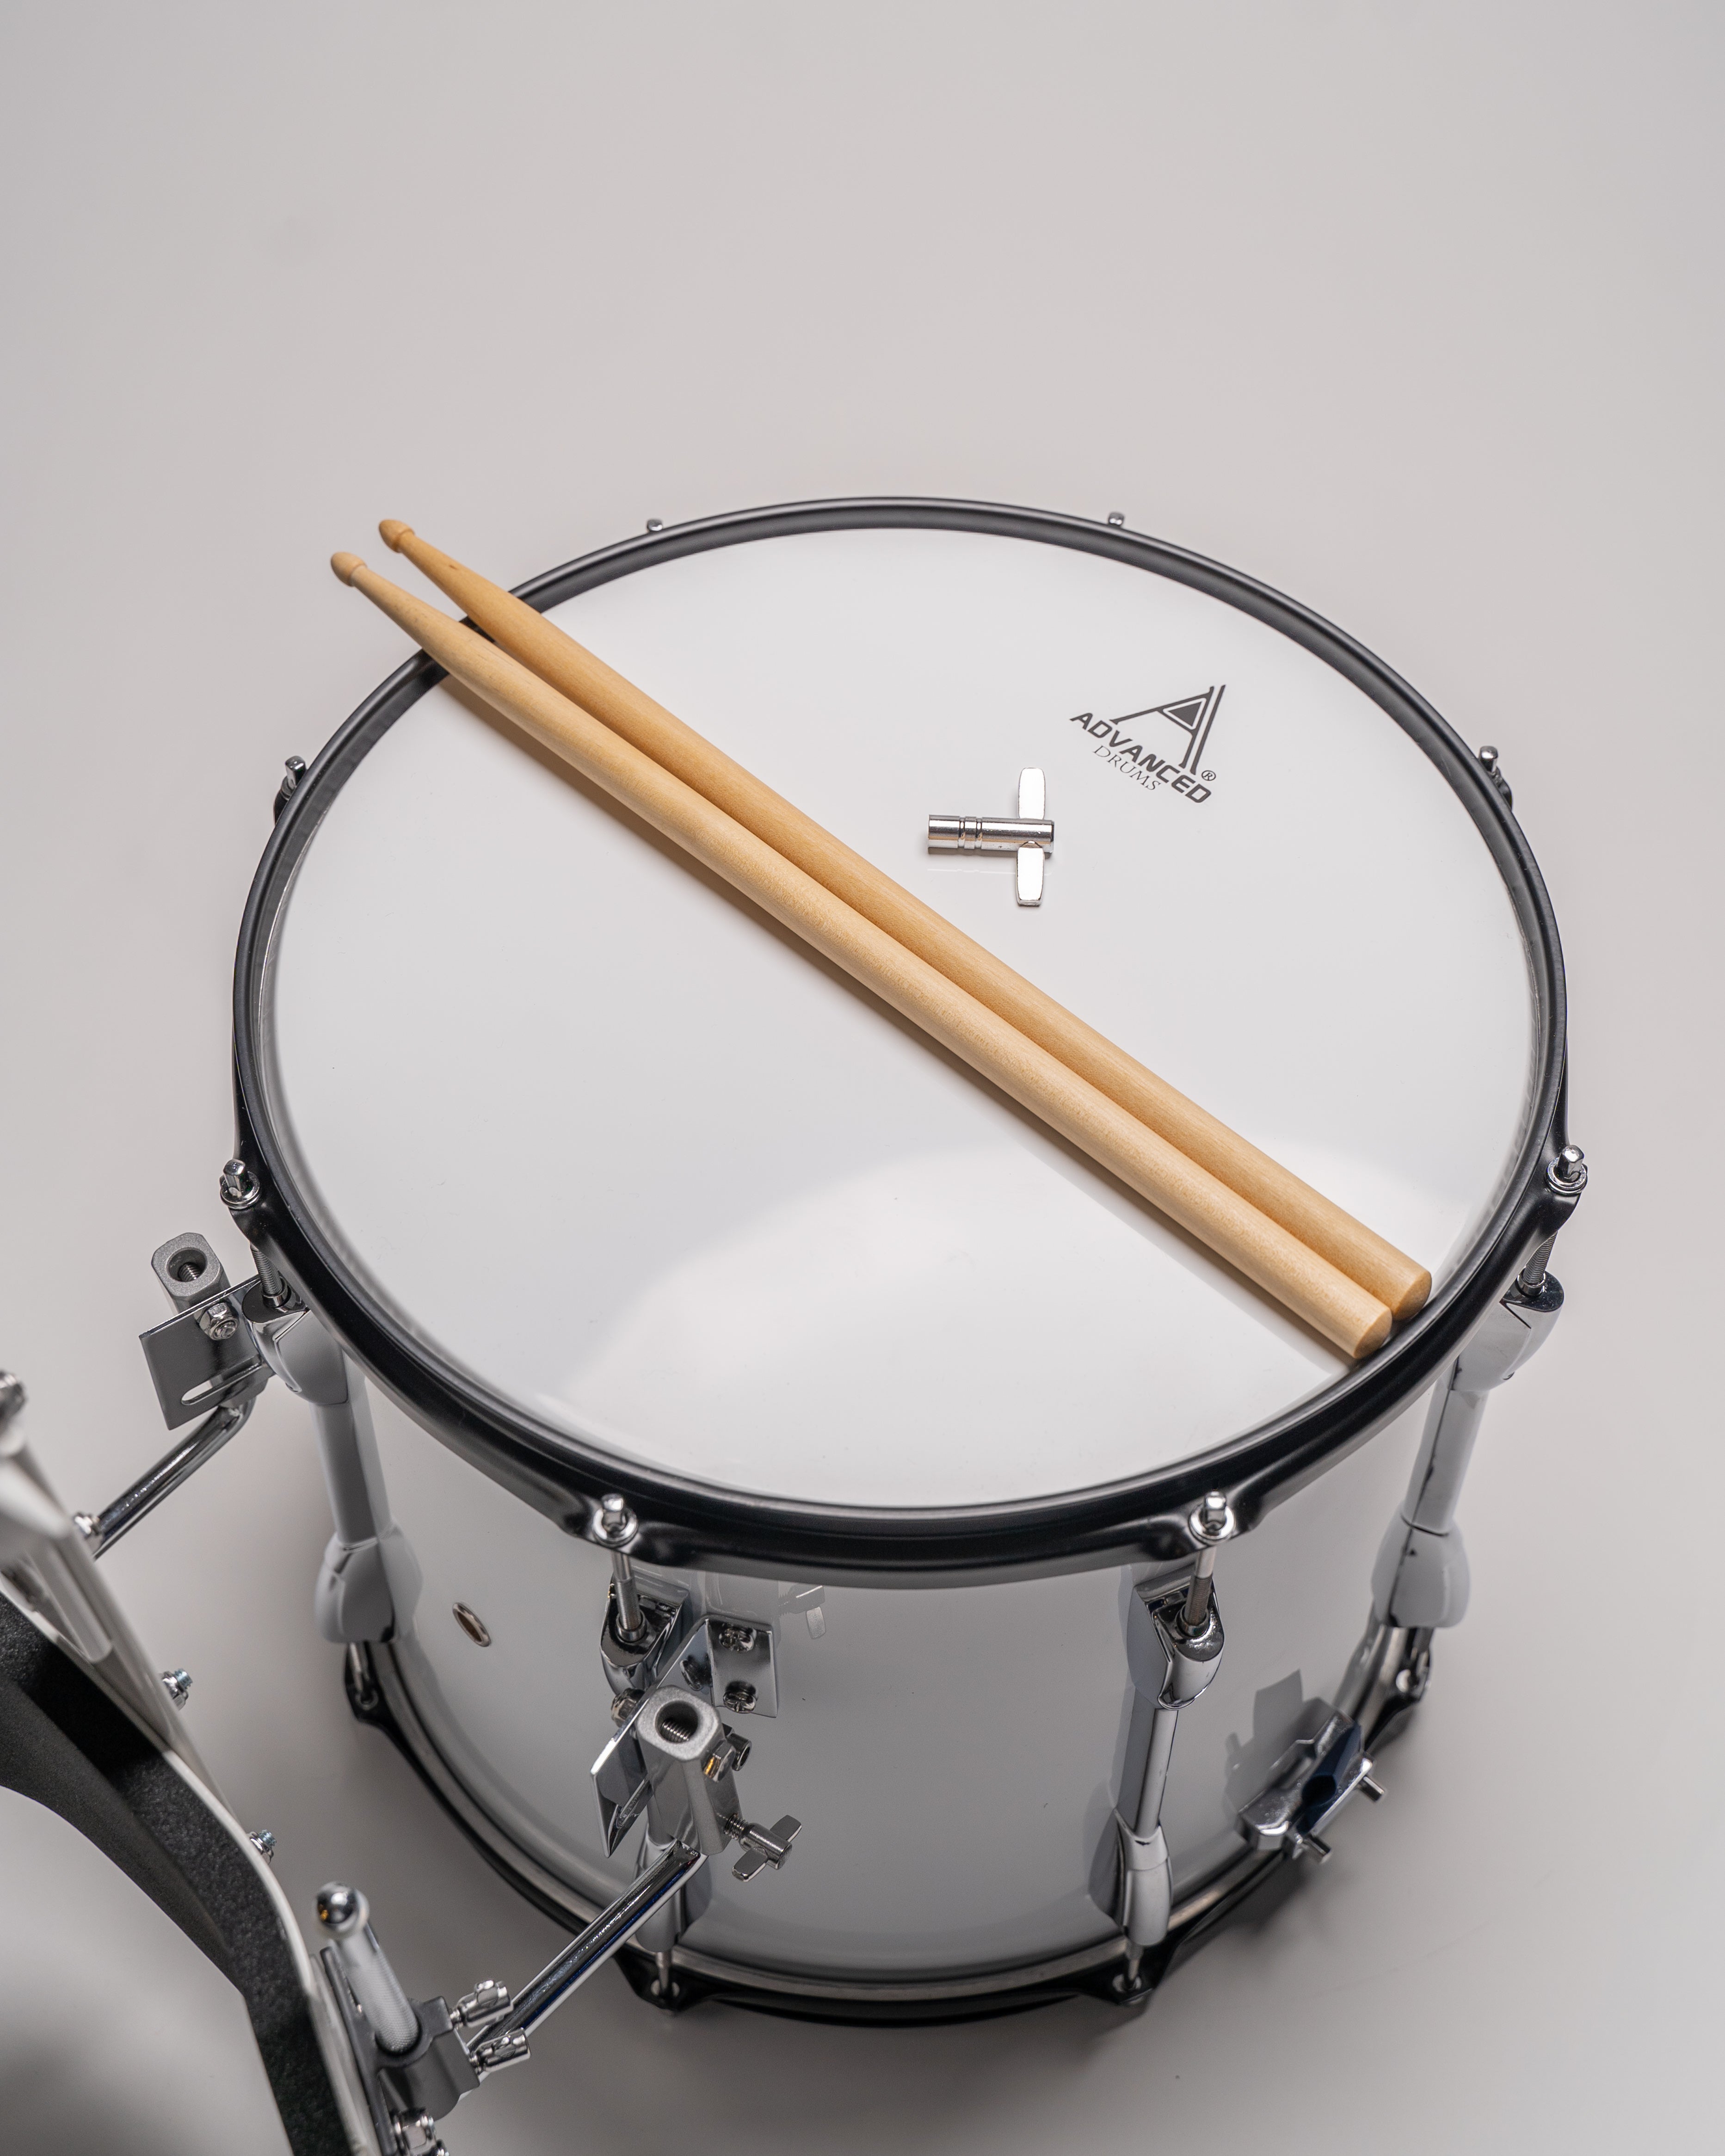 Marching Snare With Holder